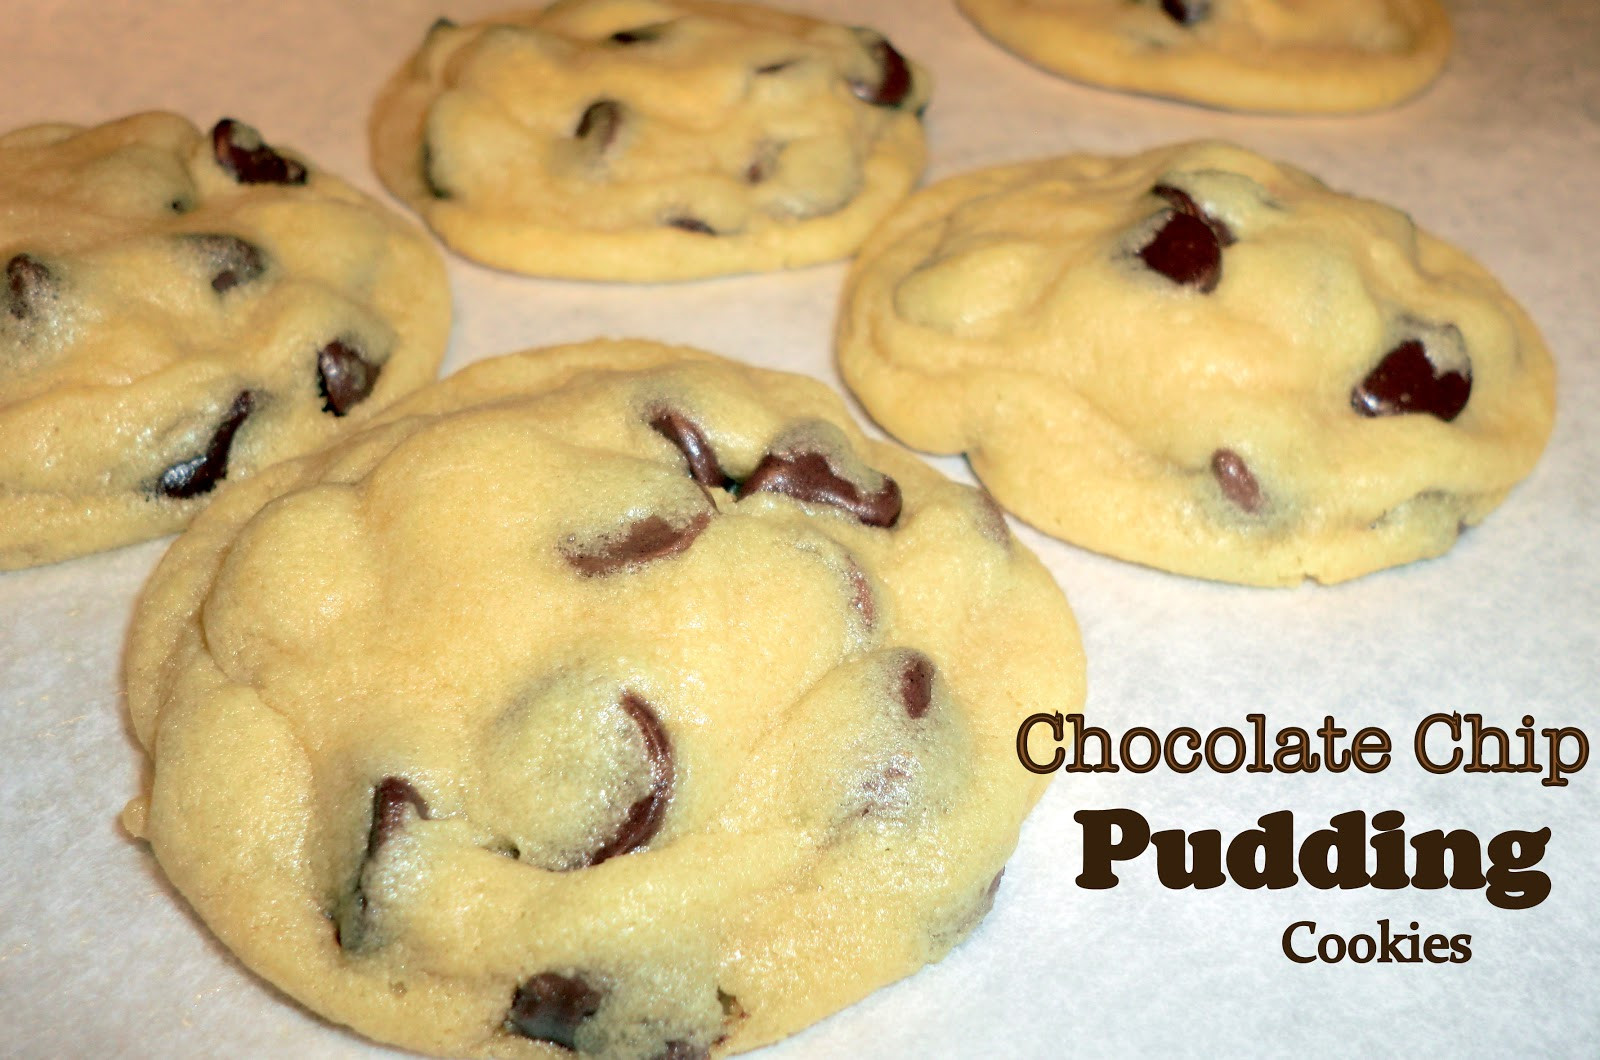 Pudding Chocolate Chip Cookies
 The Cookie Jar Chocolate Chip Pudding Cookies